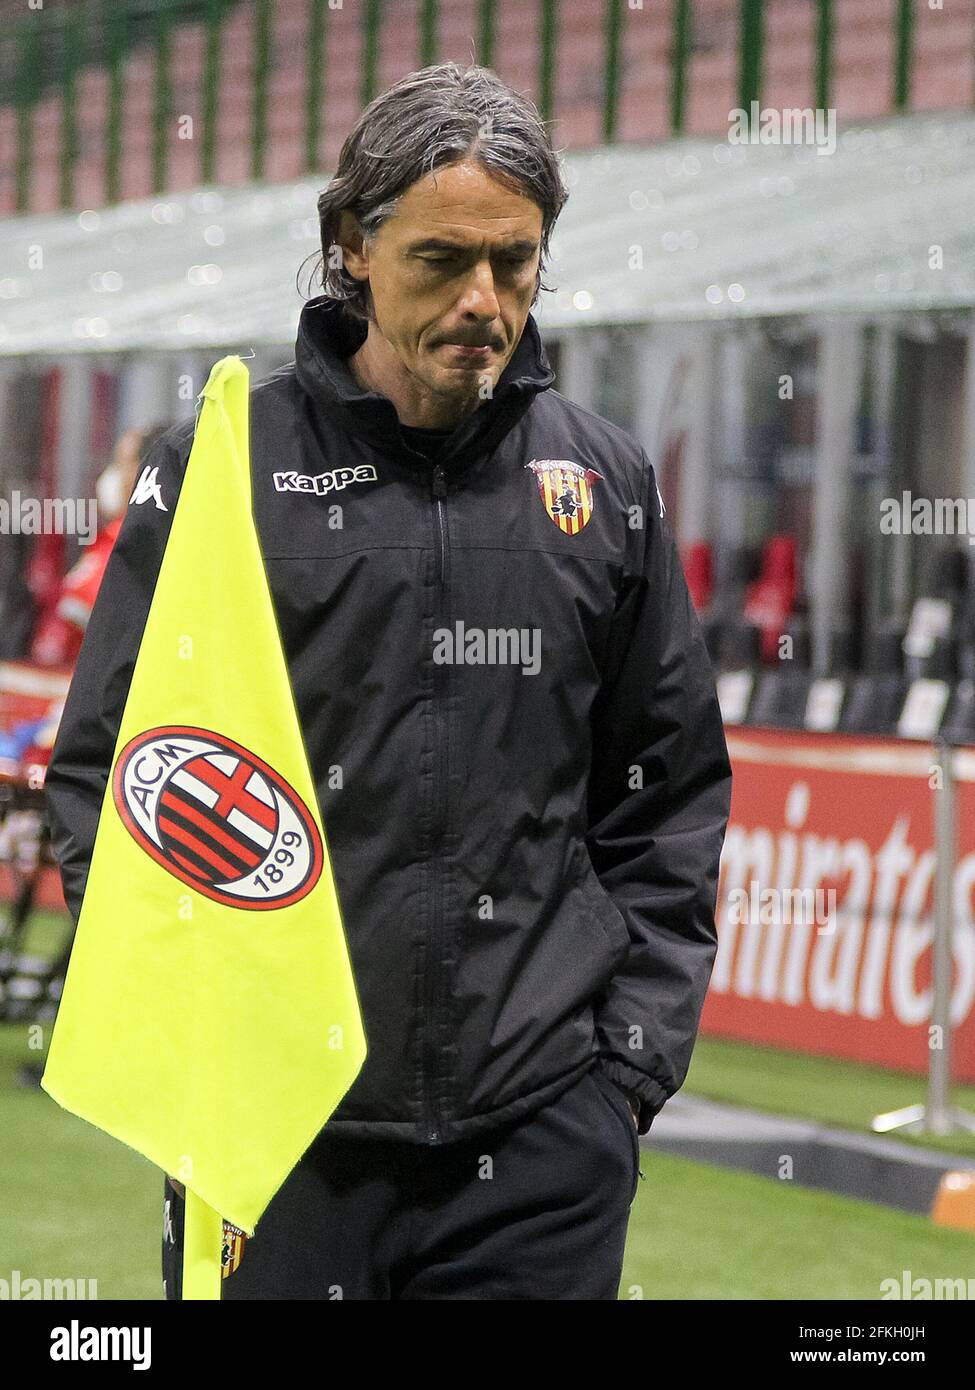 MILAN, ITALY - MAY 1: coach Filippo Inzaghi of Benevento during the Serie A match between AC Milan and Benevento at Stadio Giuseppe Meazza on May 1, 2021 in Milan, Italy (Photo by Ciro Santangelo/Orange Pictures) Stock Photo